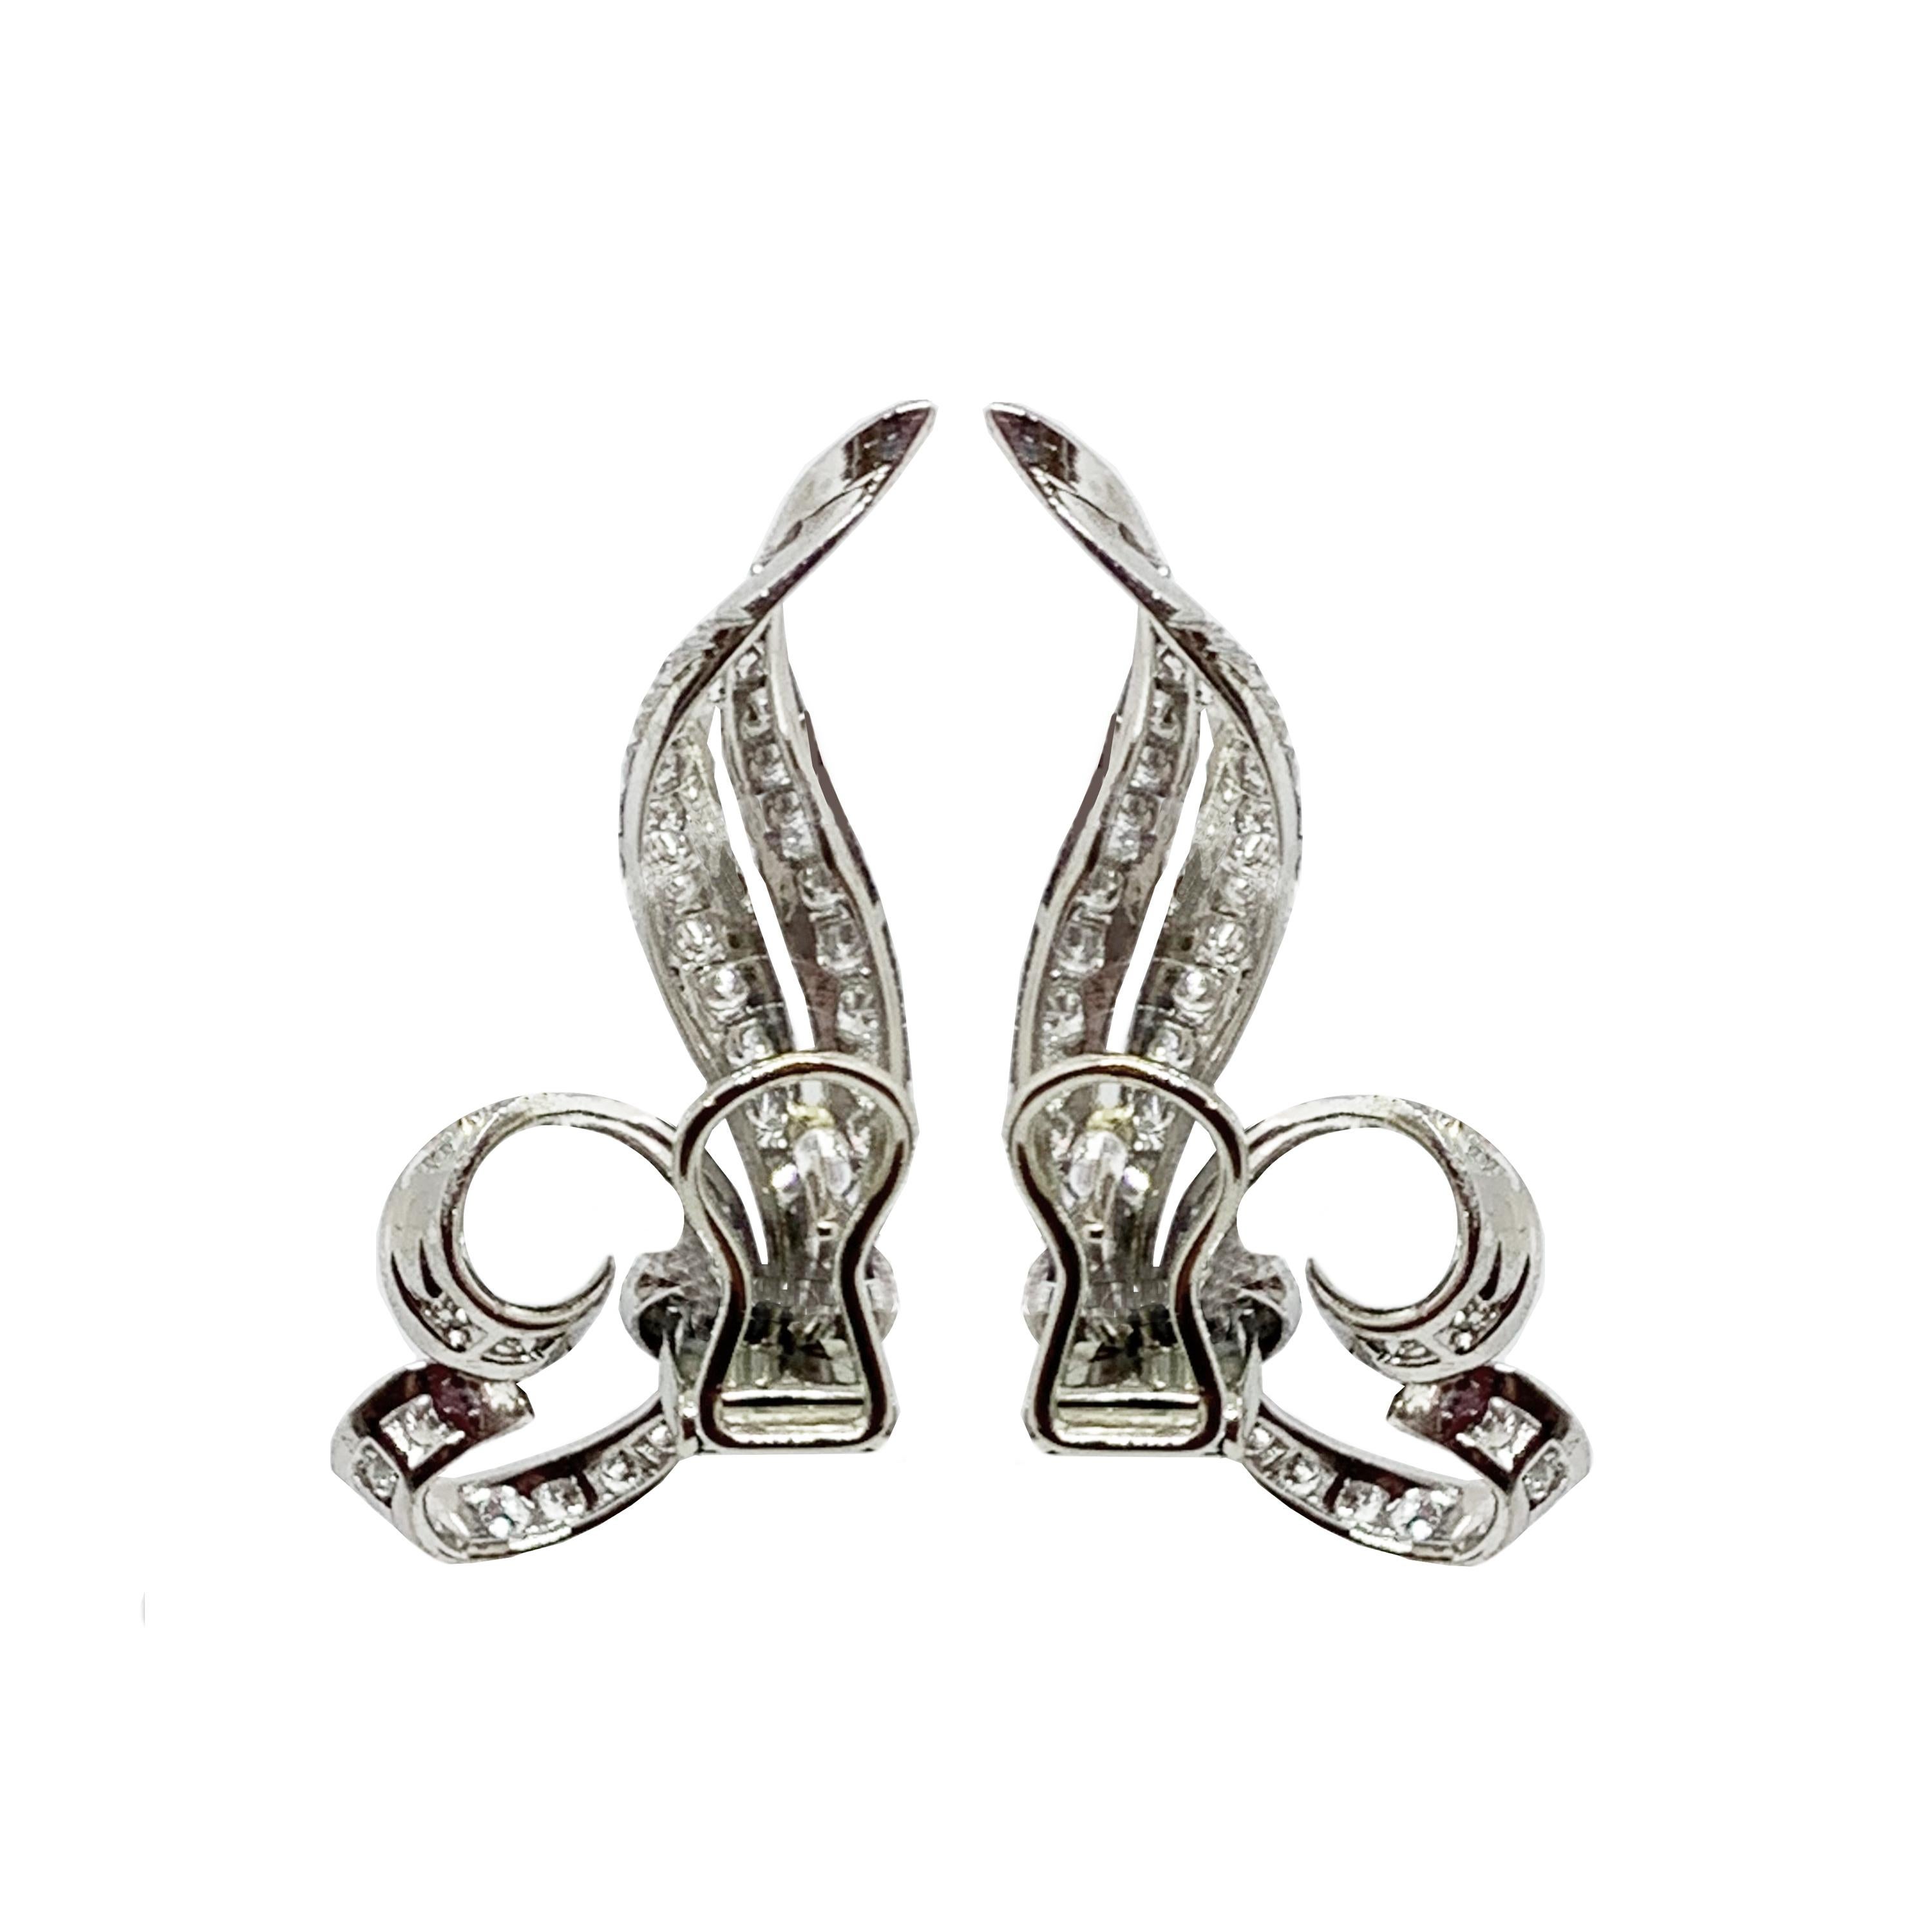 Pair of elegant earrings in white gold and diamonds. Hand made in Italy in the '50s design. Typical style of the Dolce Vita period! 
Approximately 2 kt diamonds 